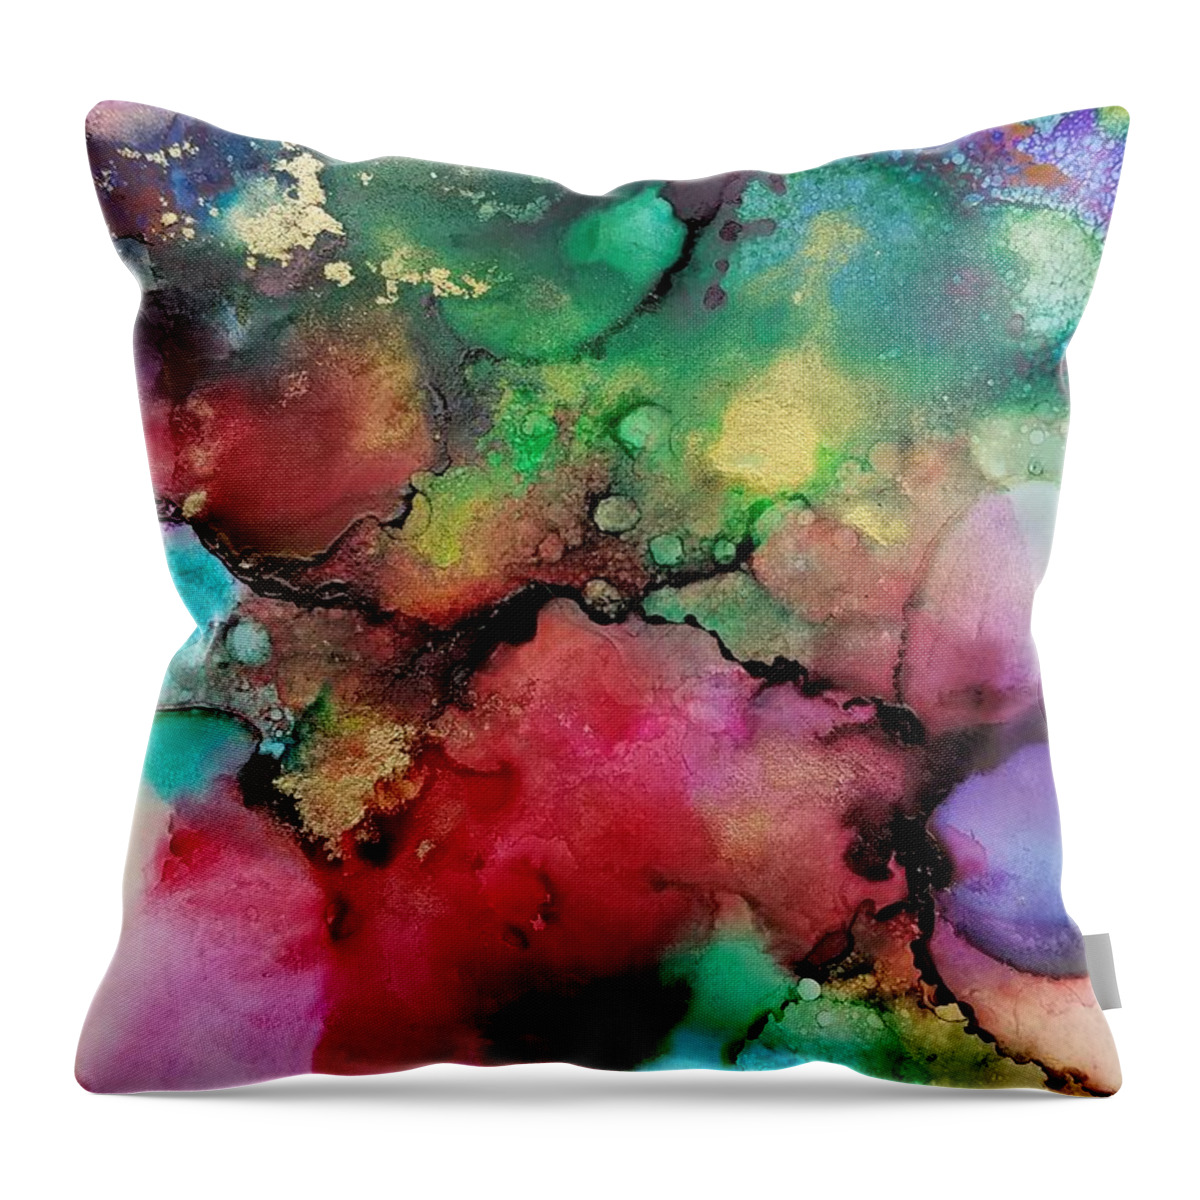 Abstract Throw Pillow featuring the painting My Bubbles by Lisa Debaets